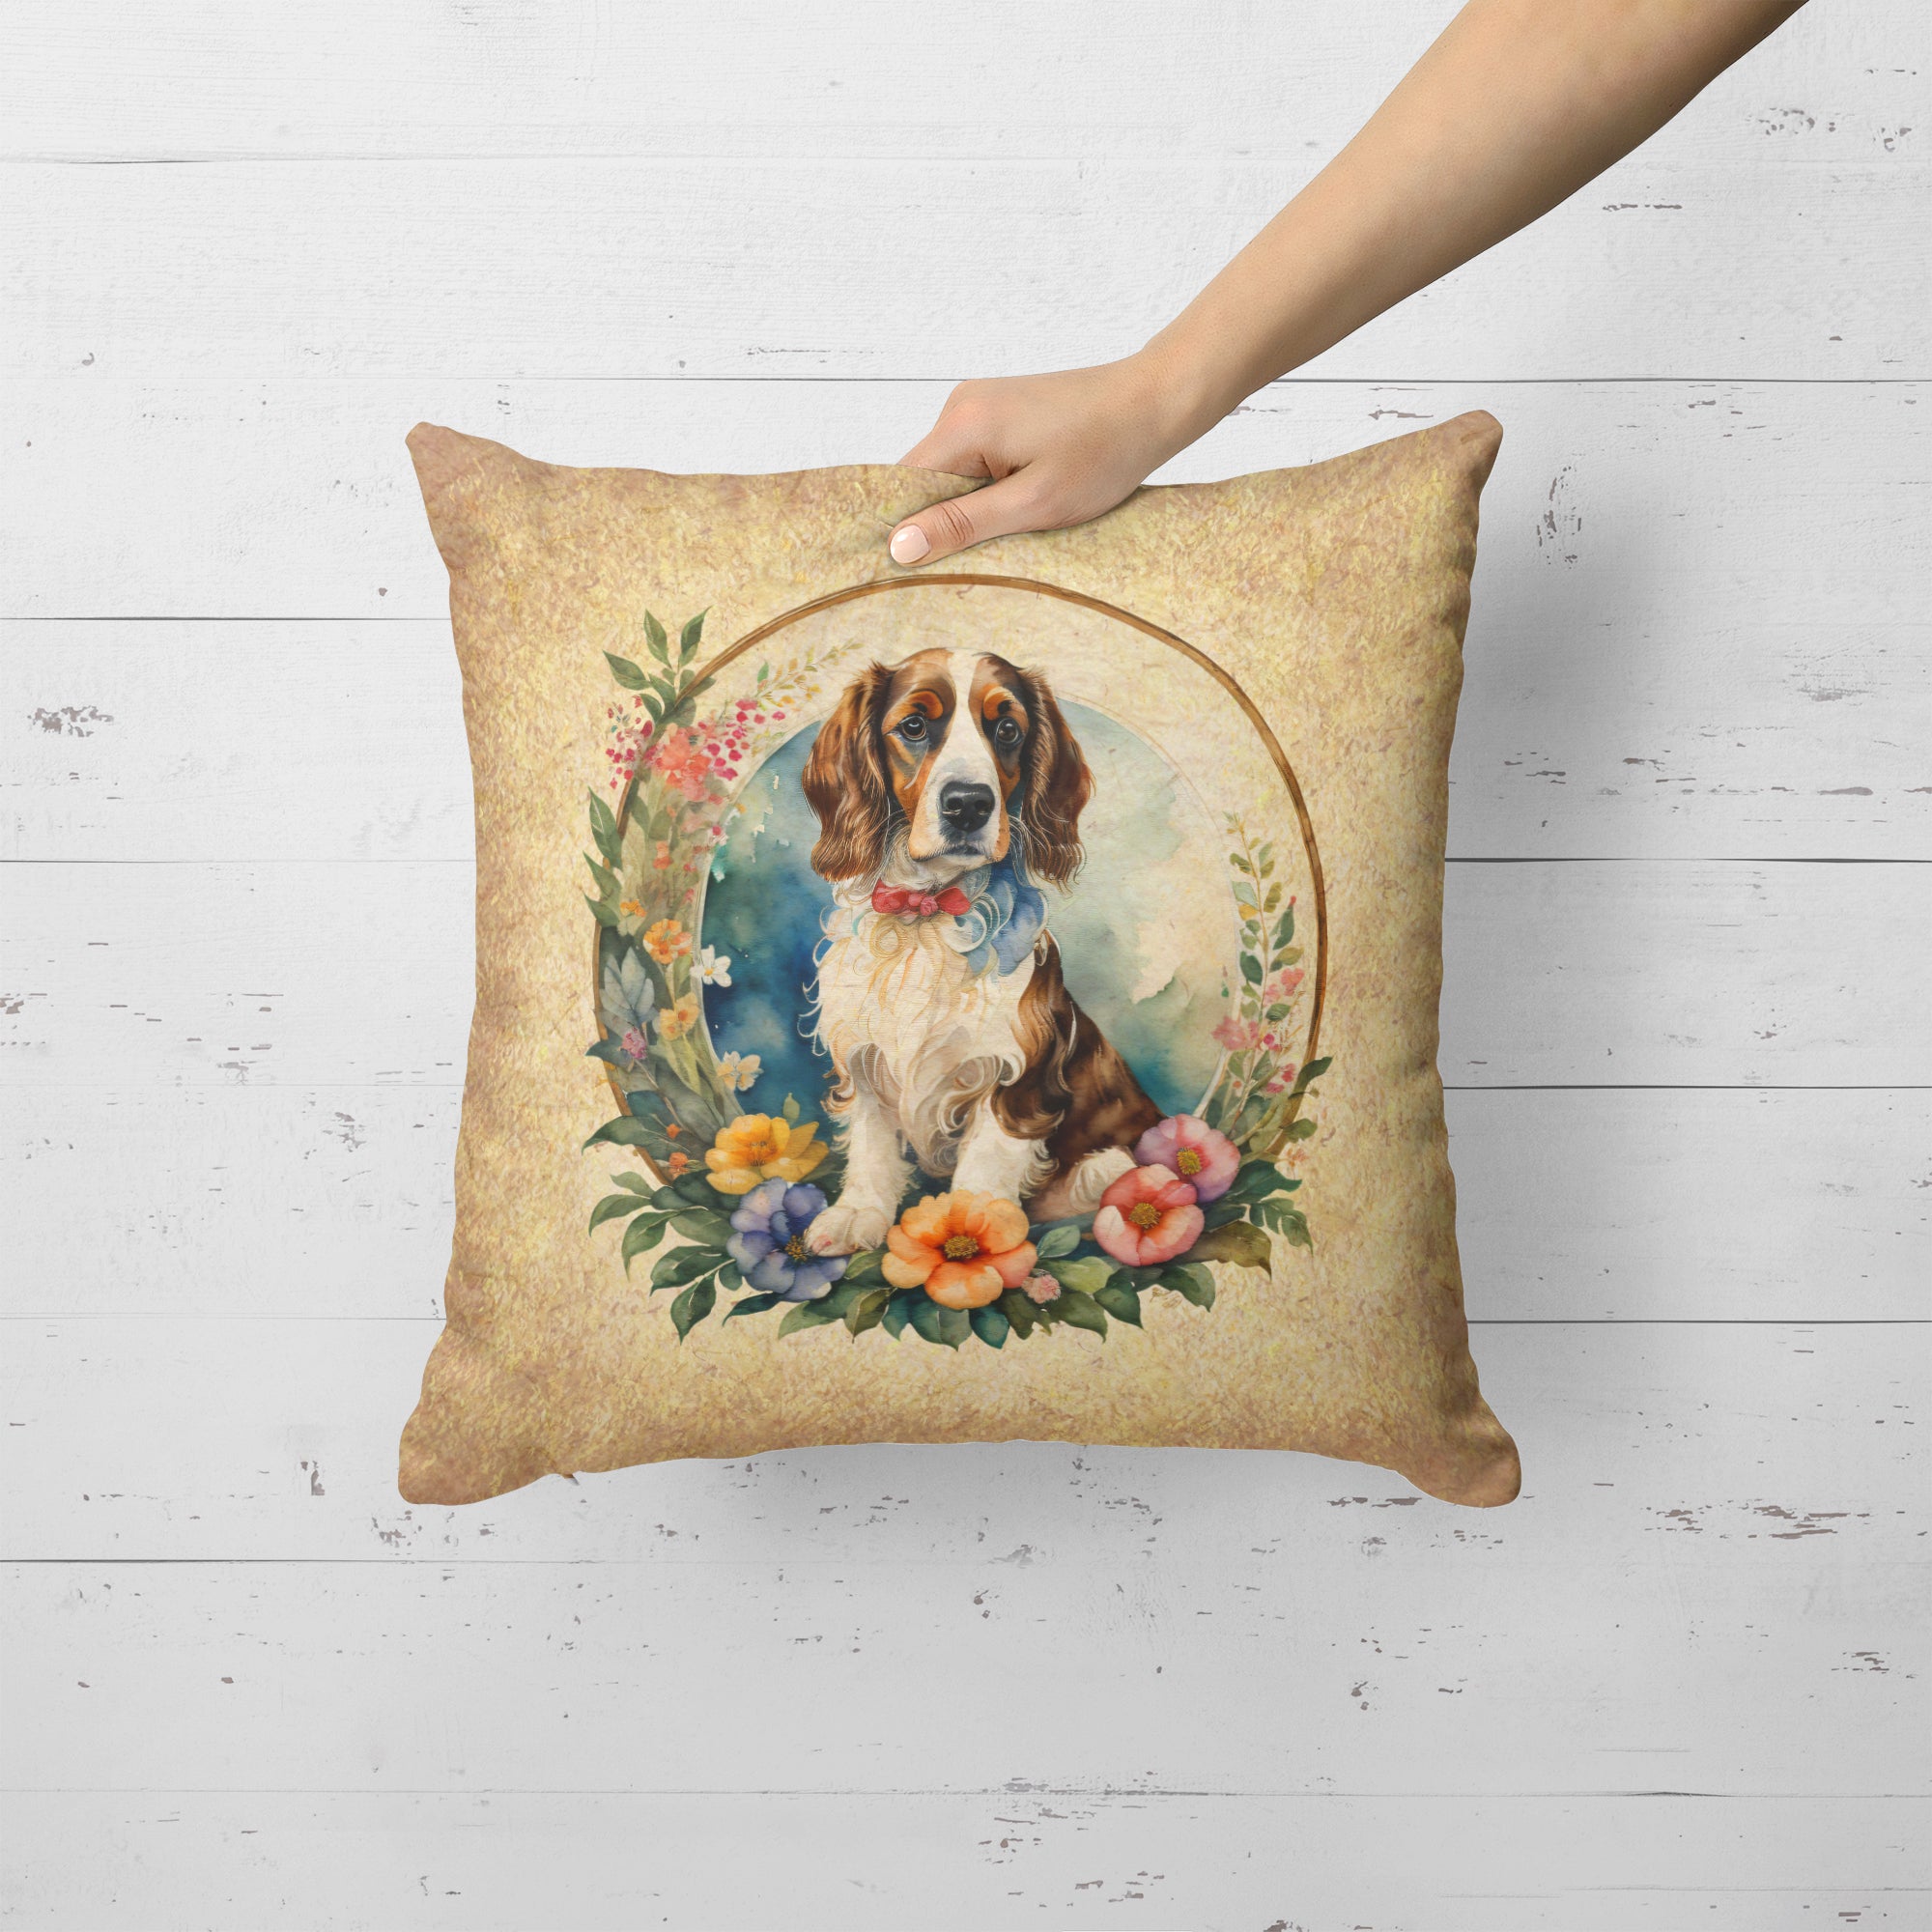 Buy this Welsh Springer Spaniel and Flowers Fabric Decorative Pillow